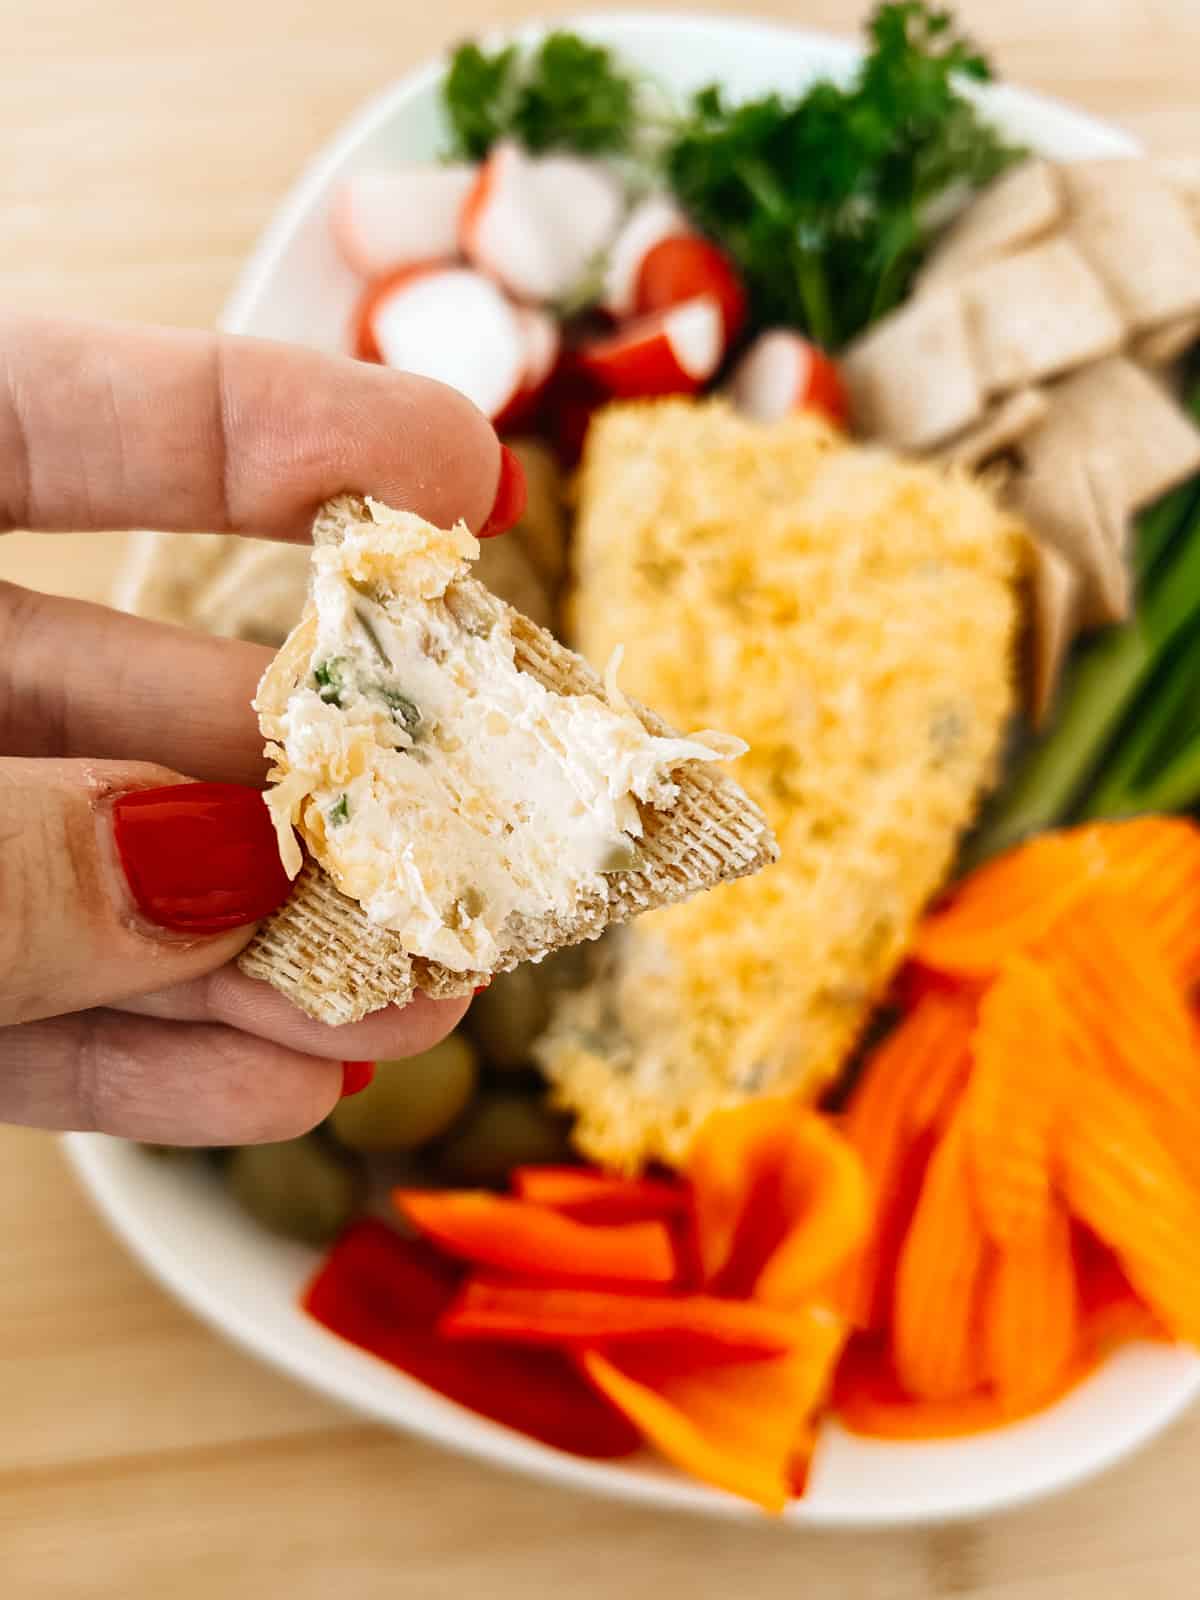 cheese spread on a cracker and a cheese ball on a tray surrounded by veggies and crackers.